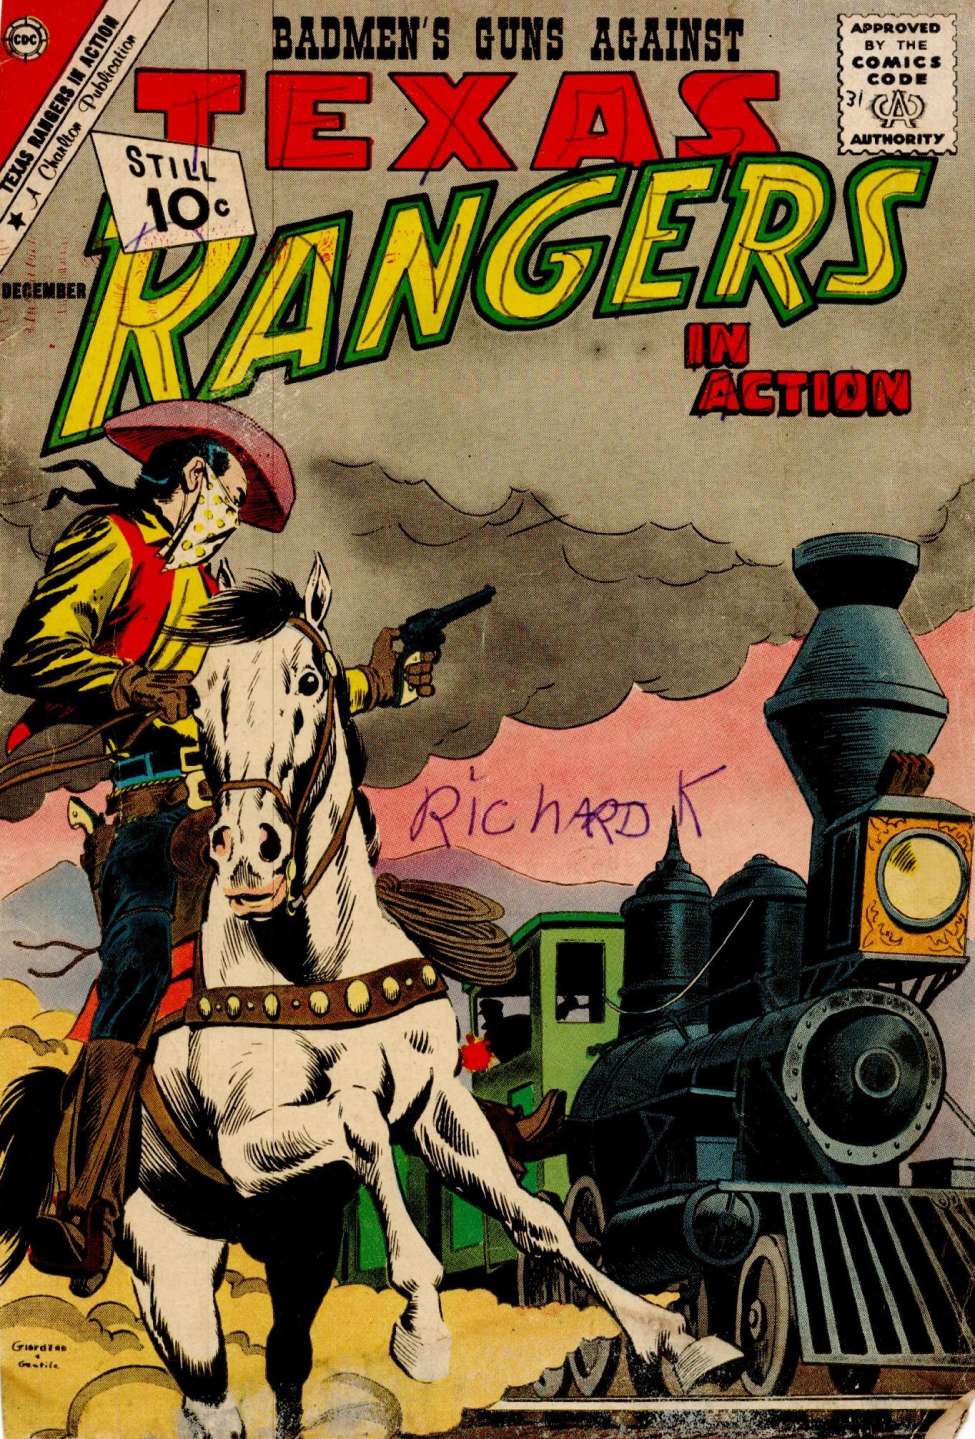 Comic Book Cover For Texas Rangers in Action 31